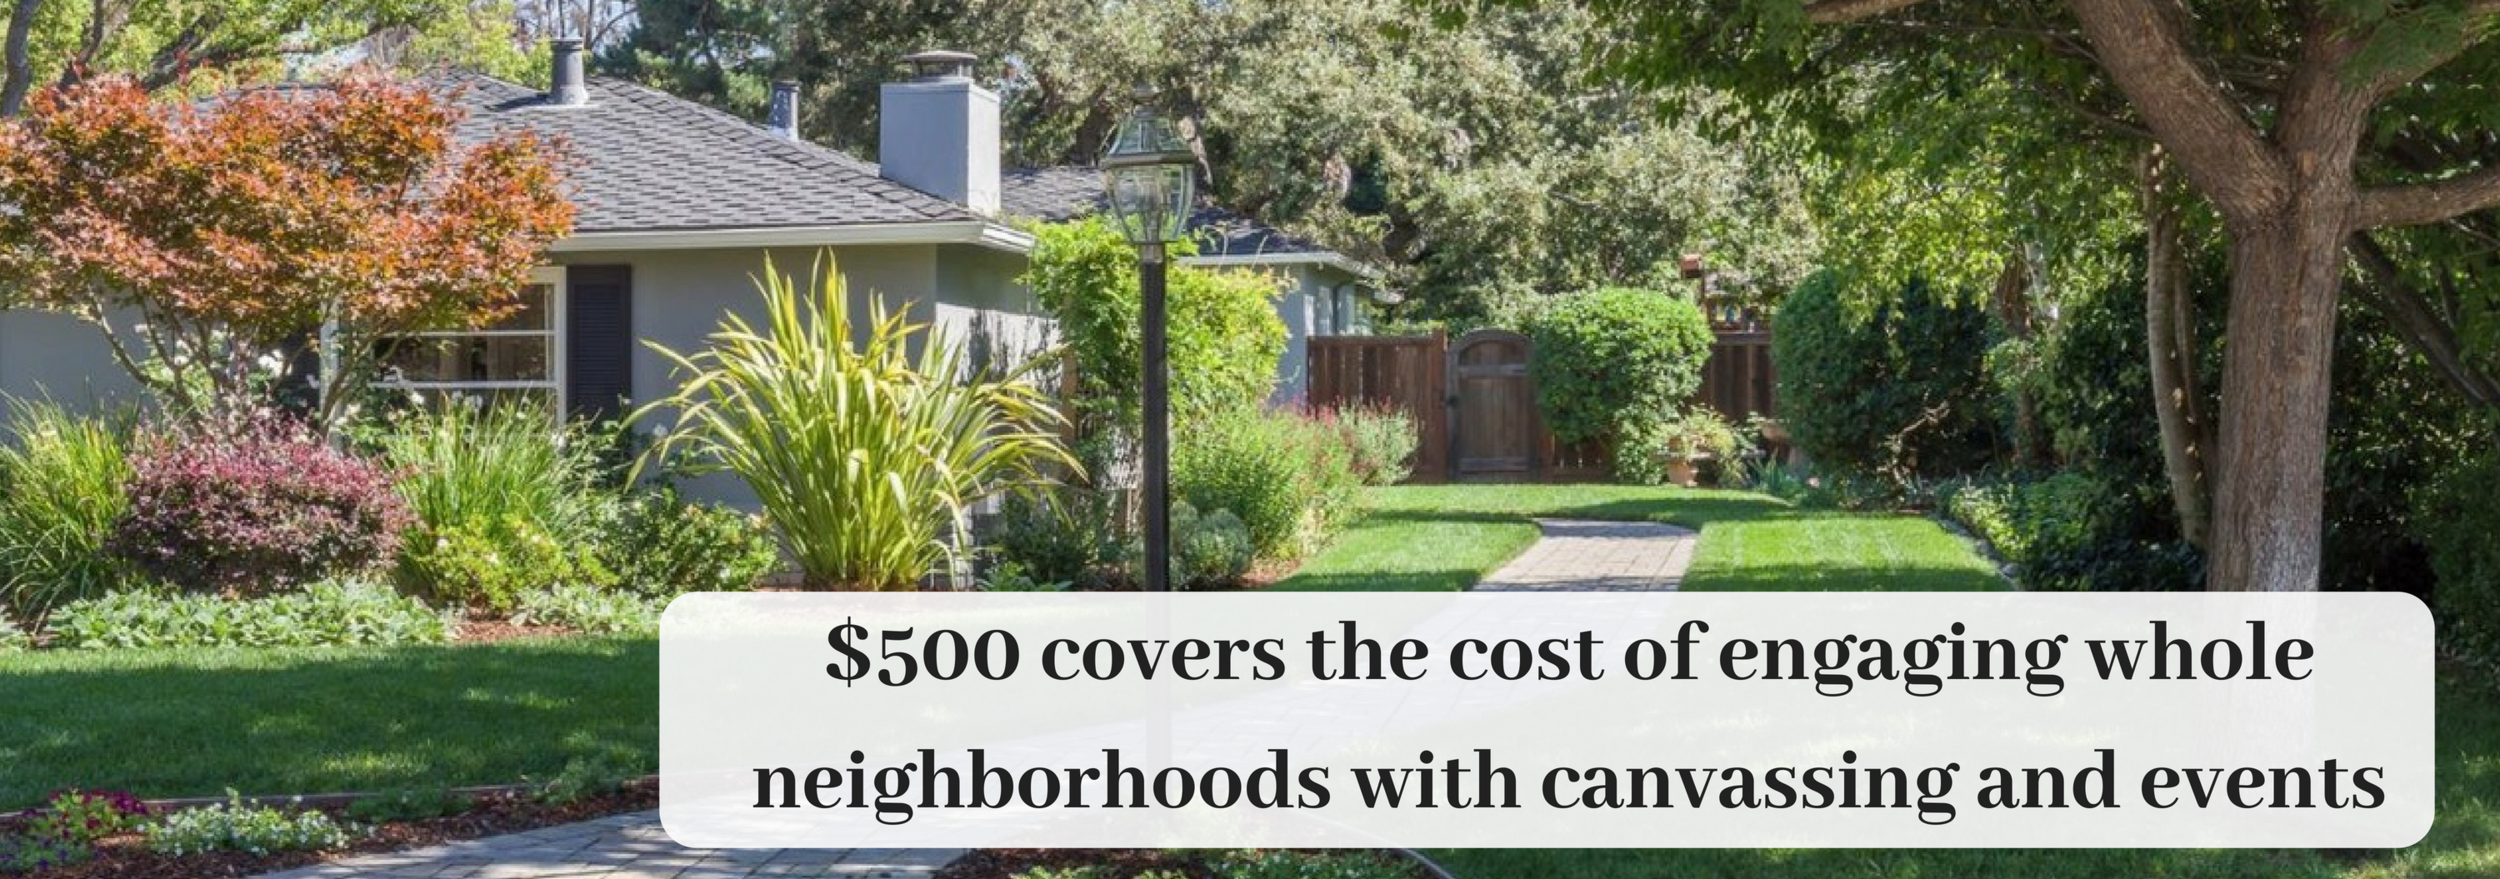 $500 covers the cost of engaging neighborhoods with low voter turnout with canvassing, flyers, and events (2).png